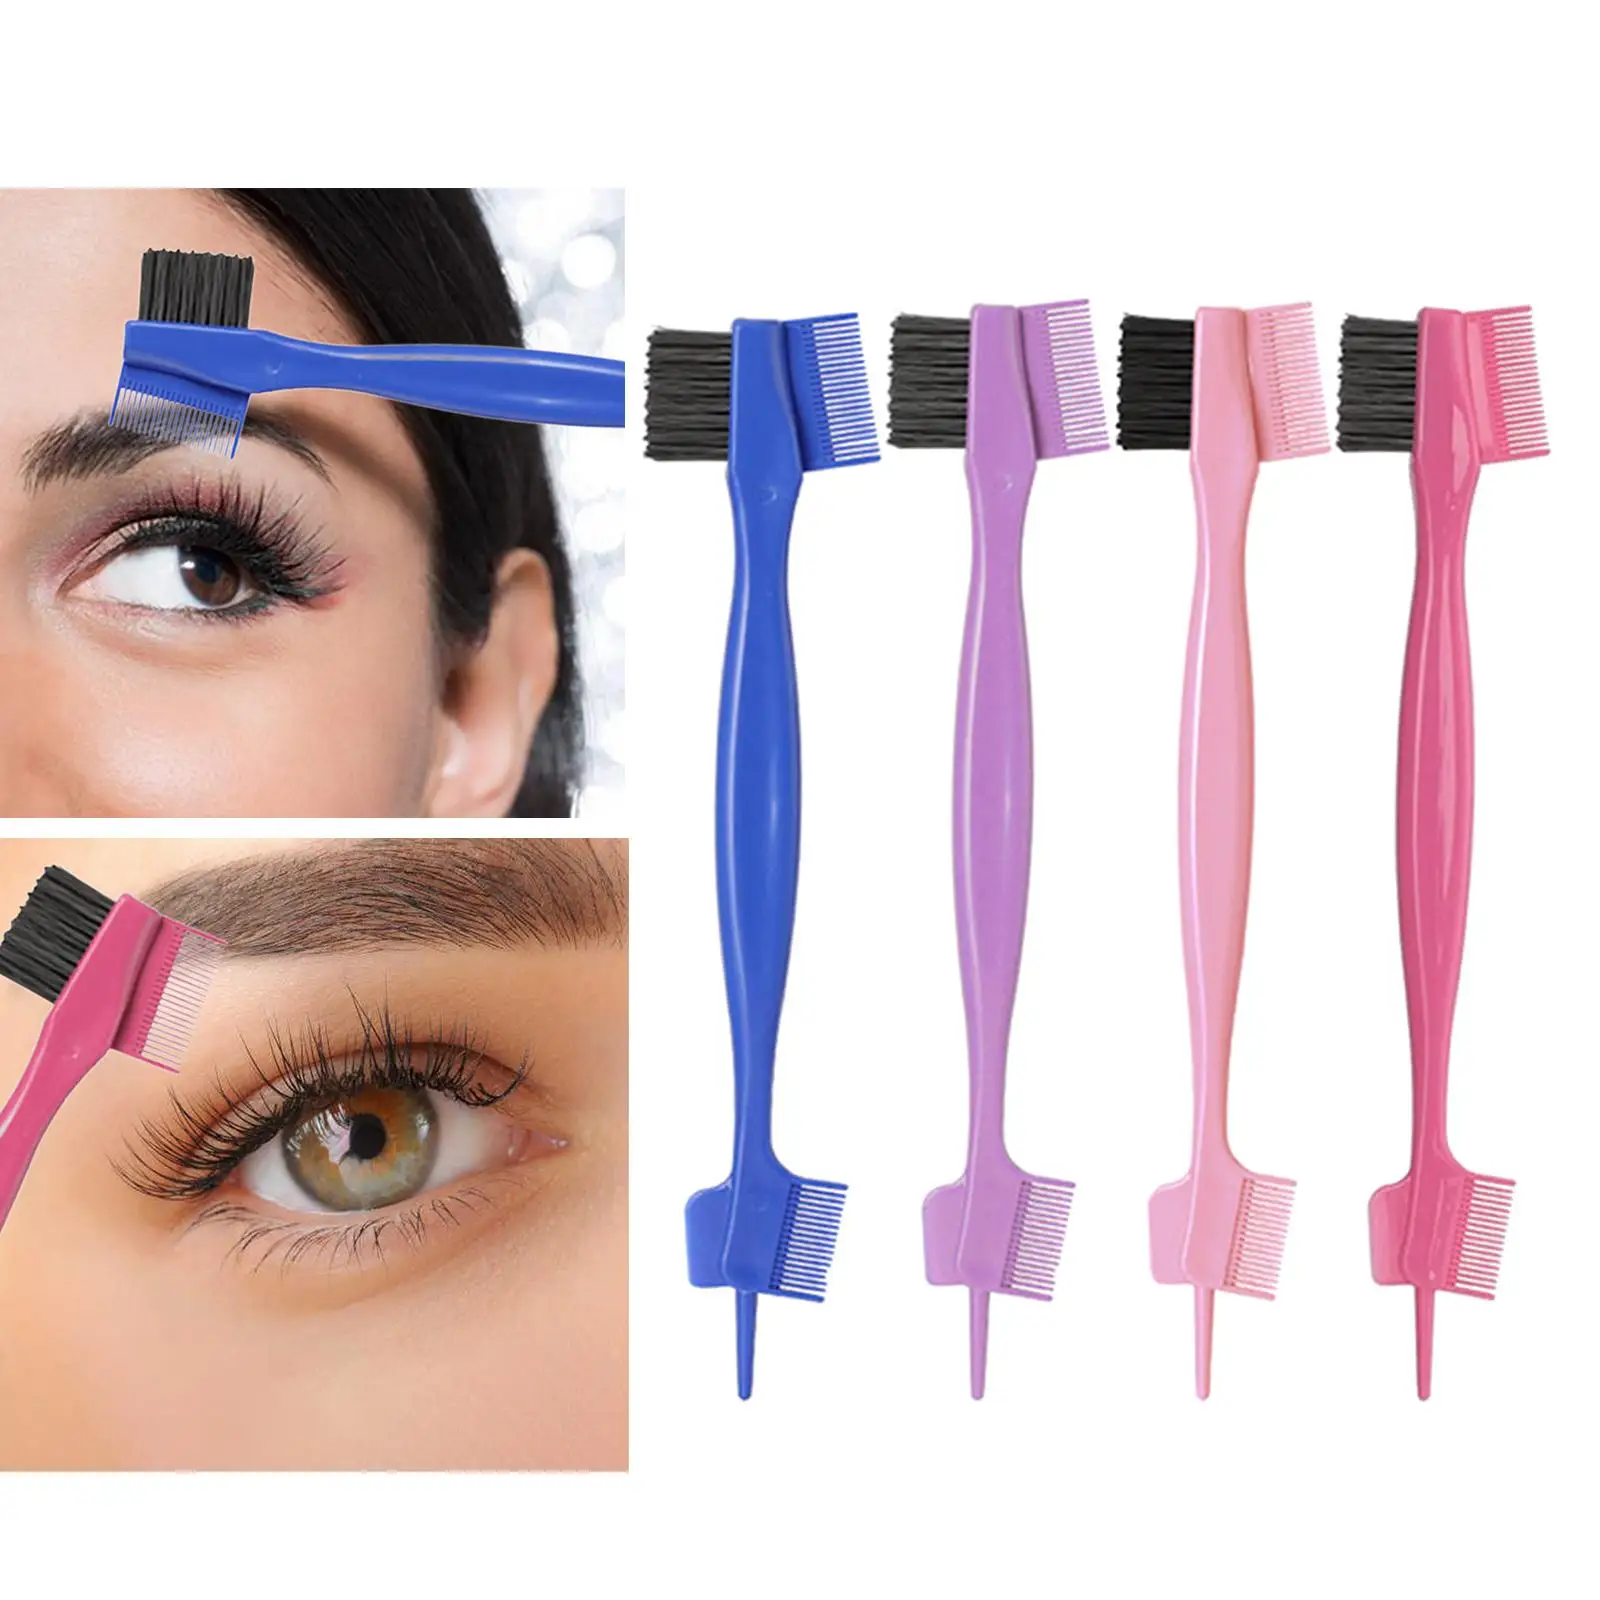 Eyebrow Brush Comb Multifunctional Double-Sided Plastic Sharper for Makeup women